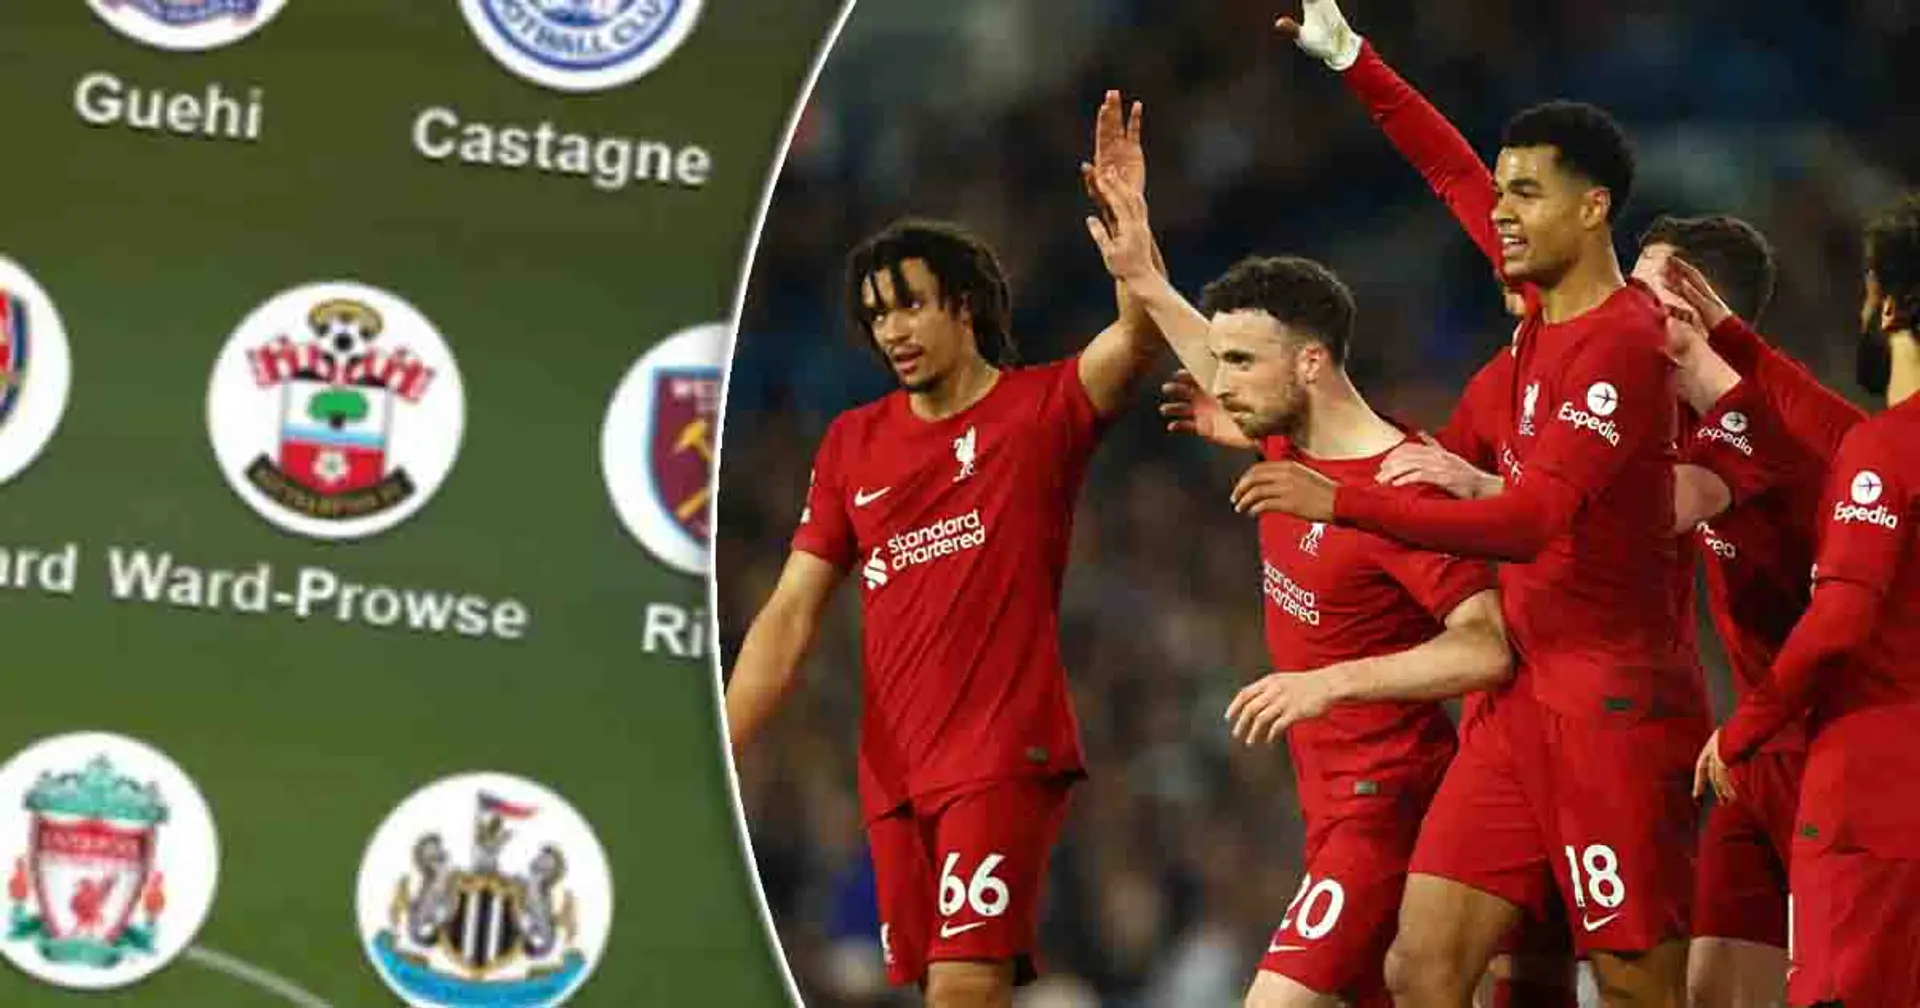 One Liverpool player named in Premier League Team of the Week - not Salah